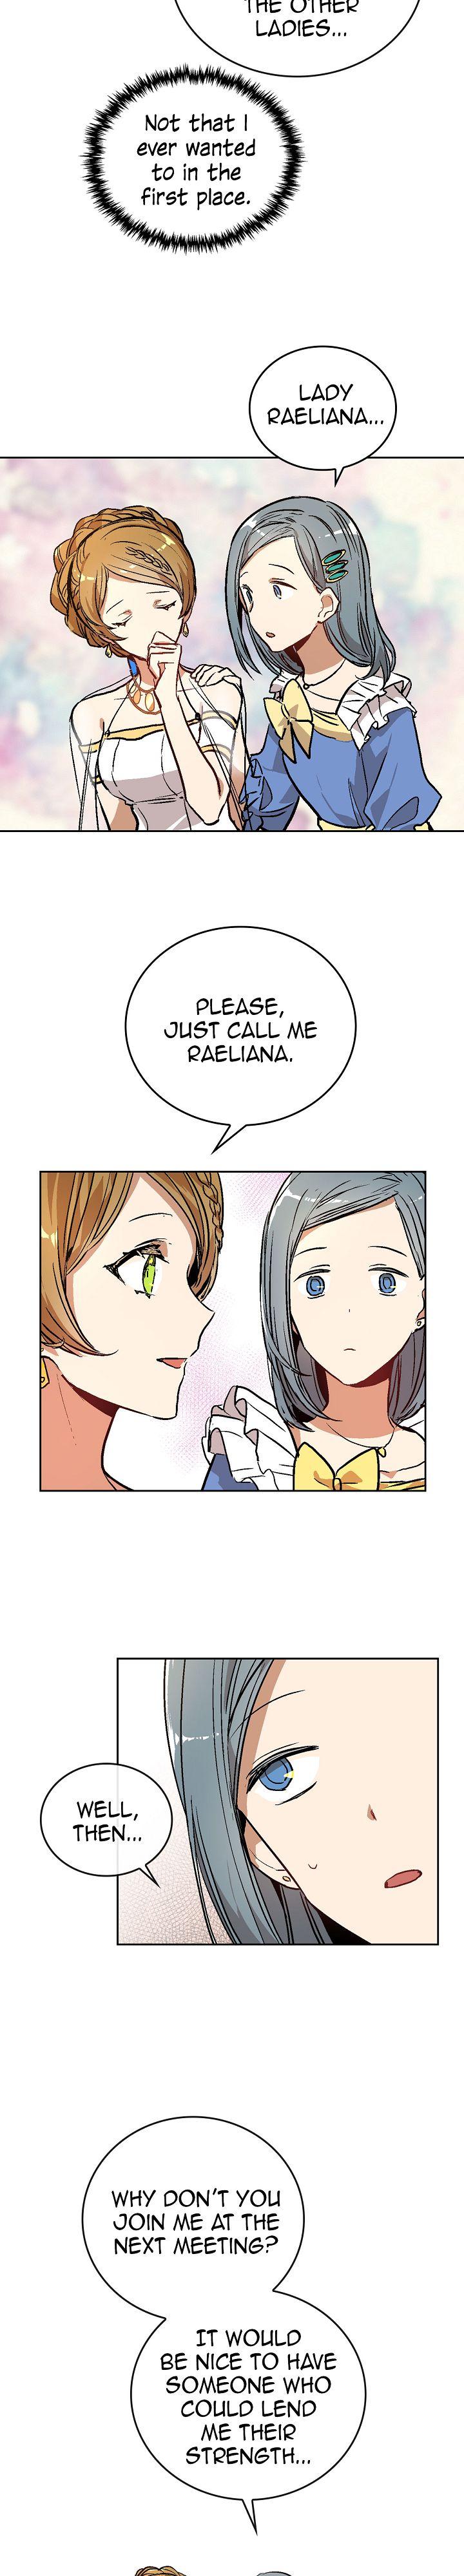 The Reason Why Raeliana Ended up at the Duke’s Mansion Chapter 18 - Page 4